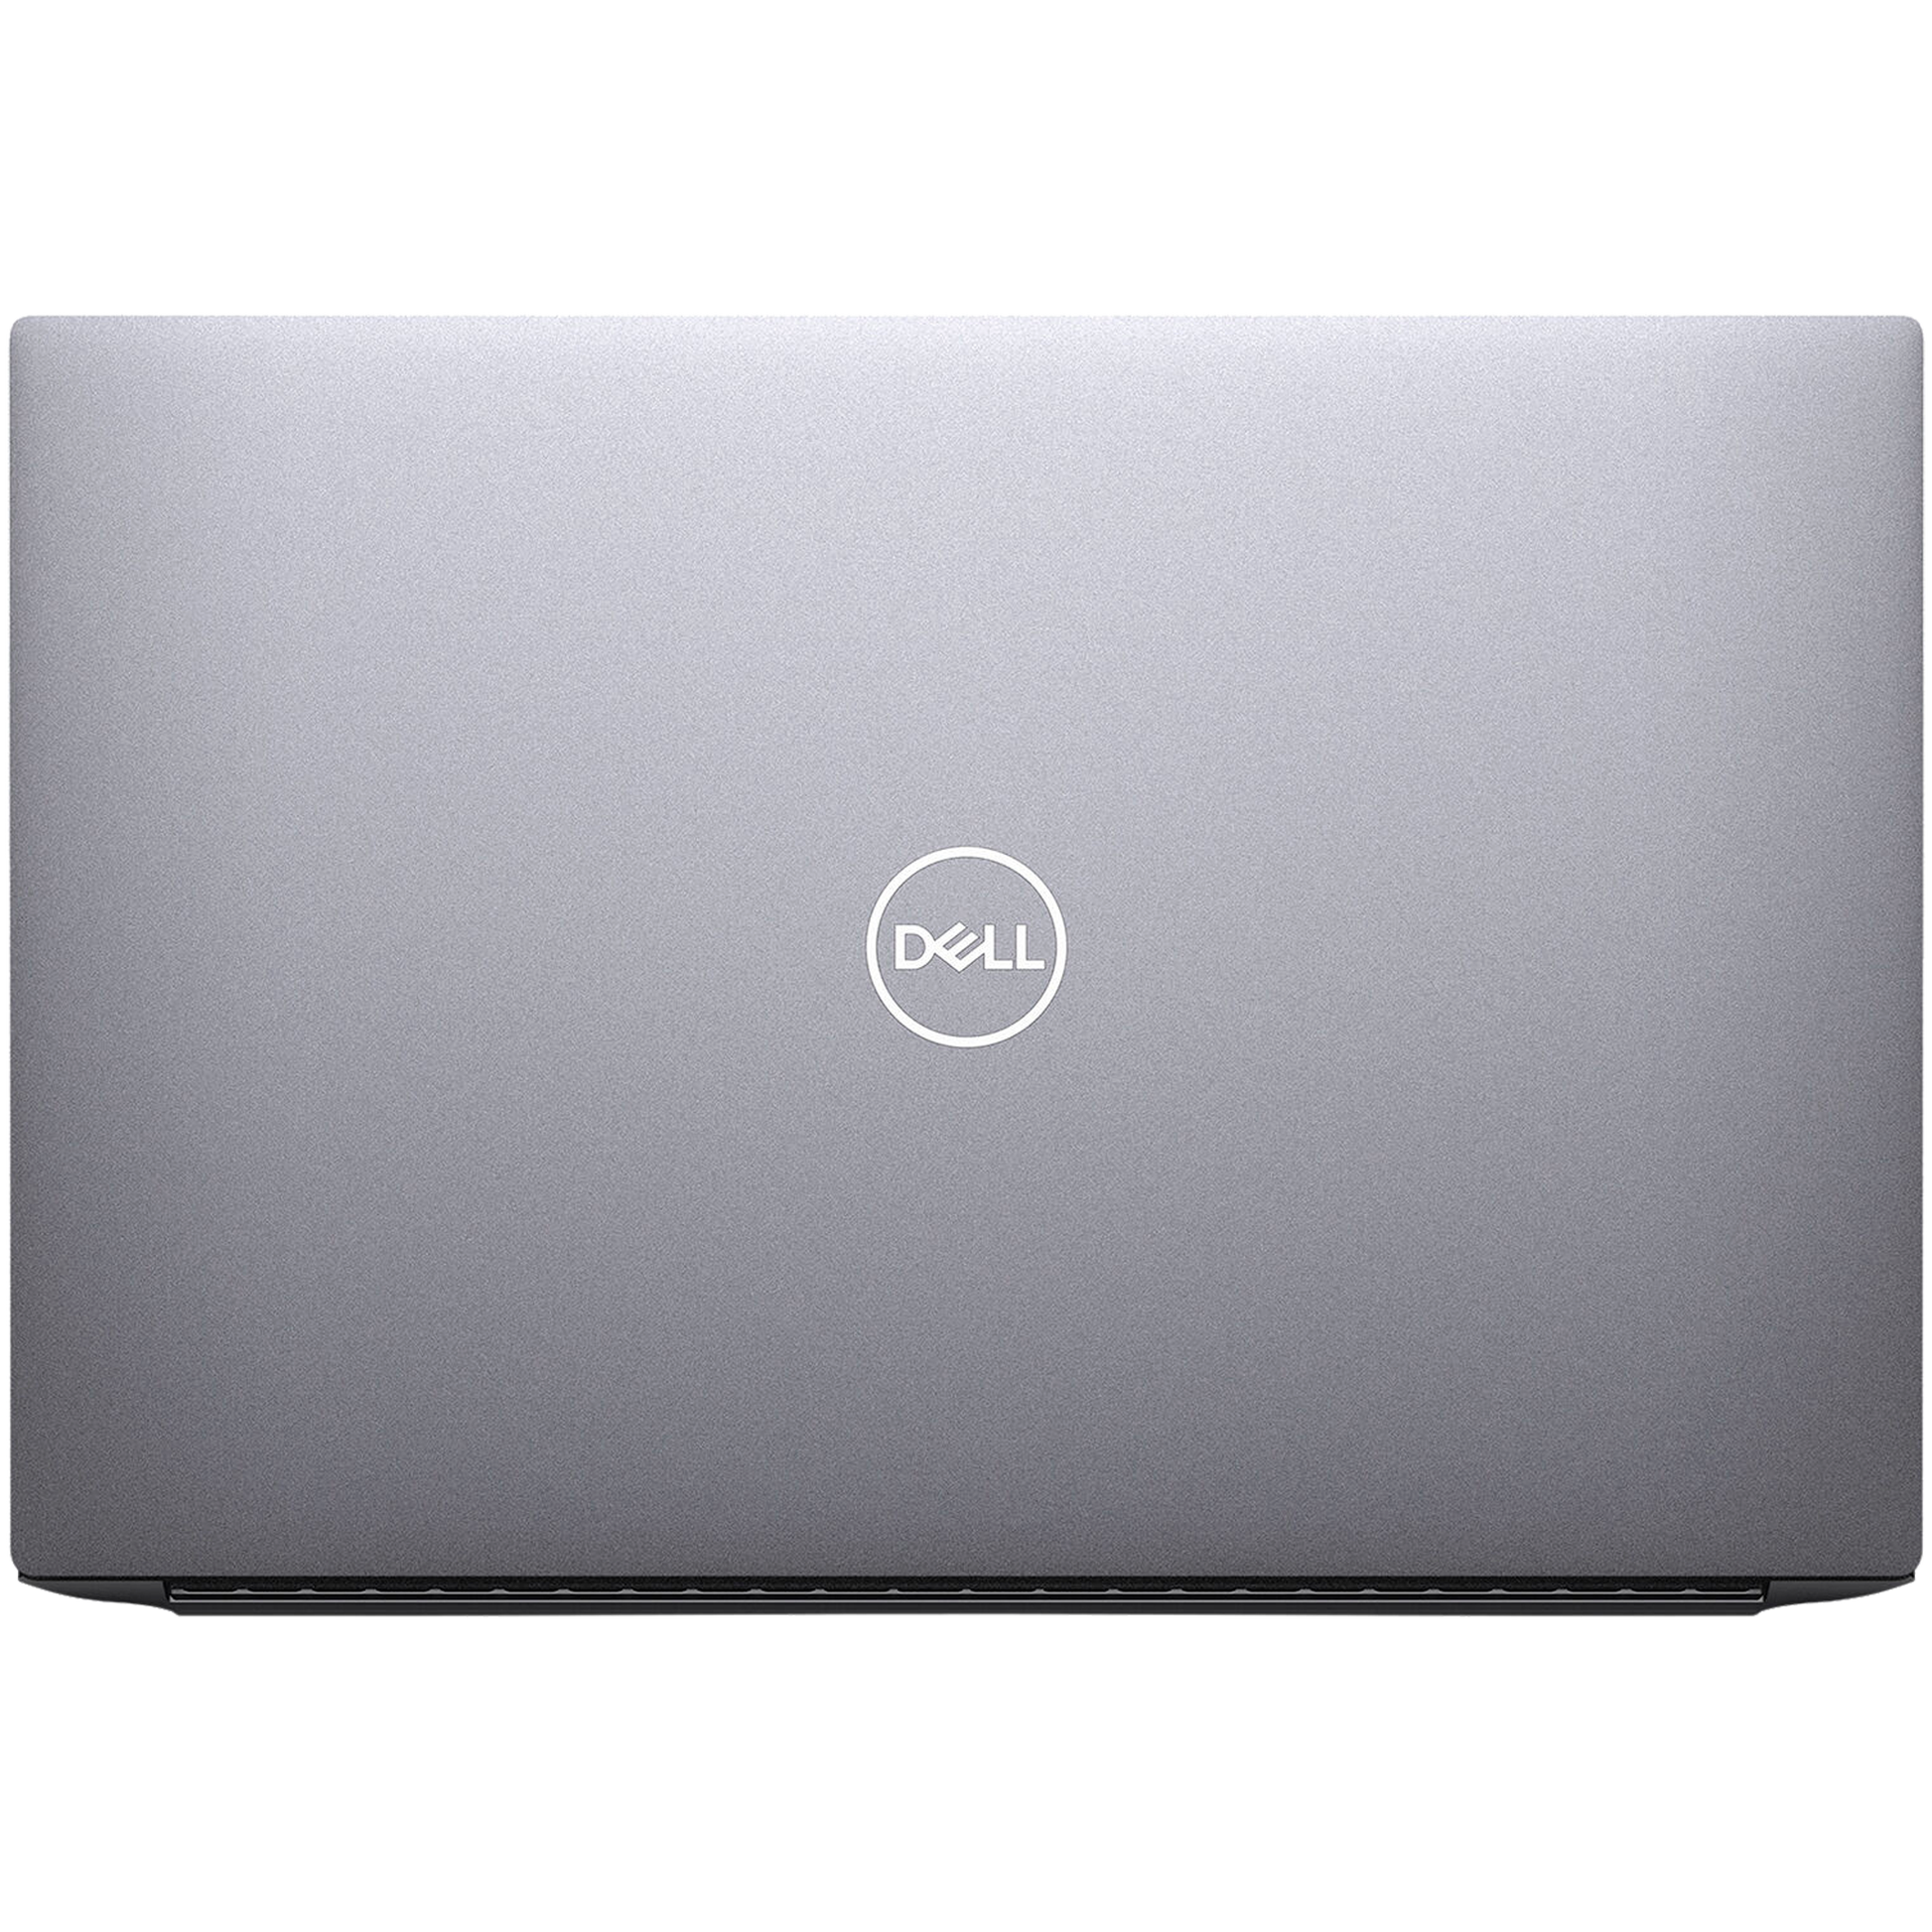 Dell Precision 5550 Intel i7, 10th Gen Mobile Workstation Touch Laptop with GPU Laptops - Refurbished